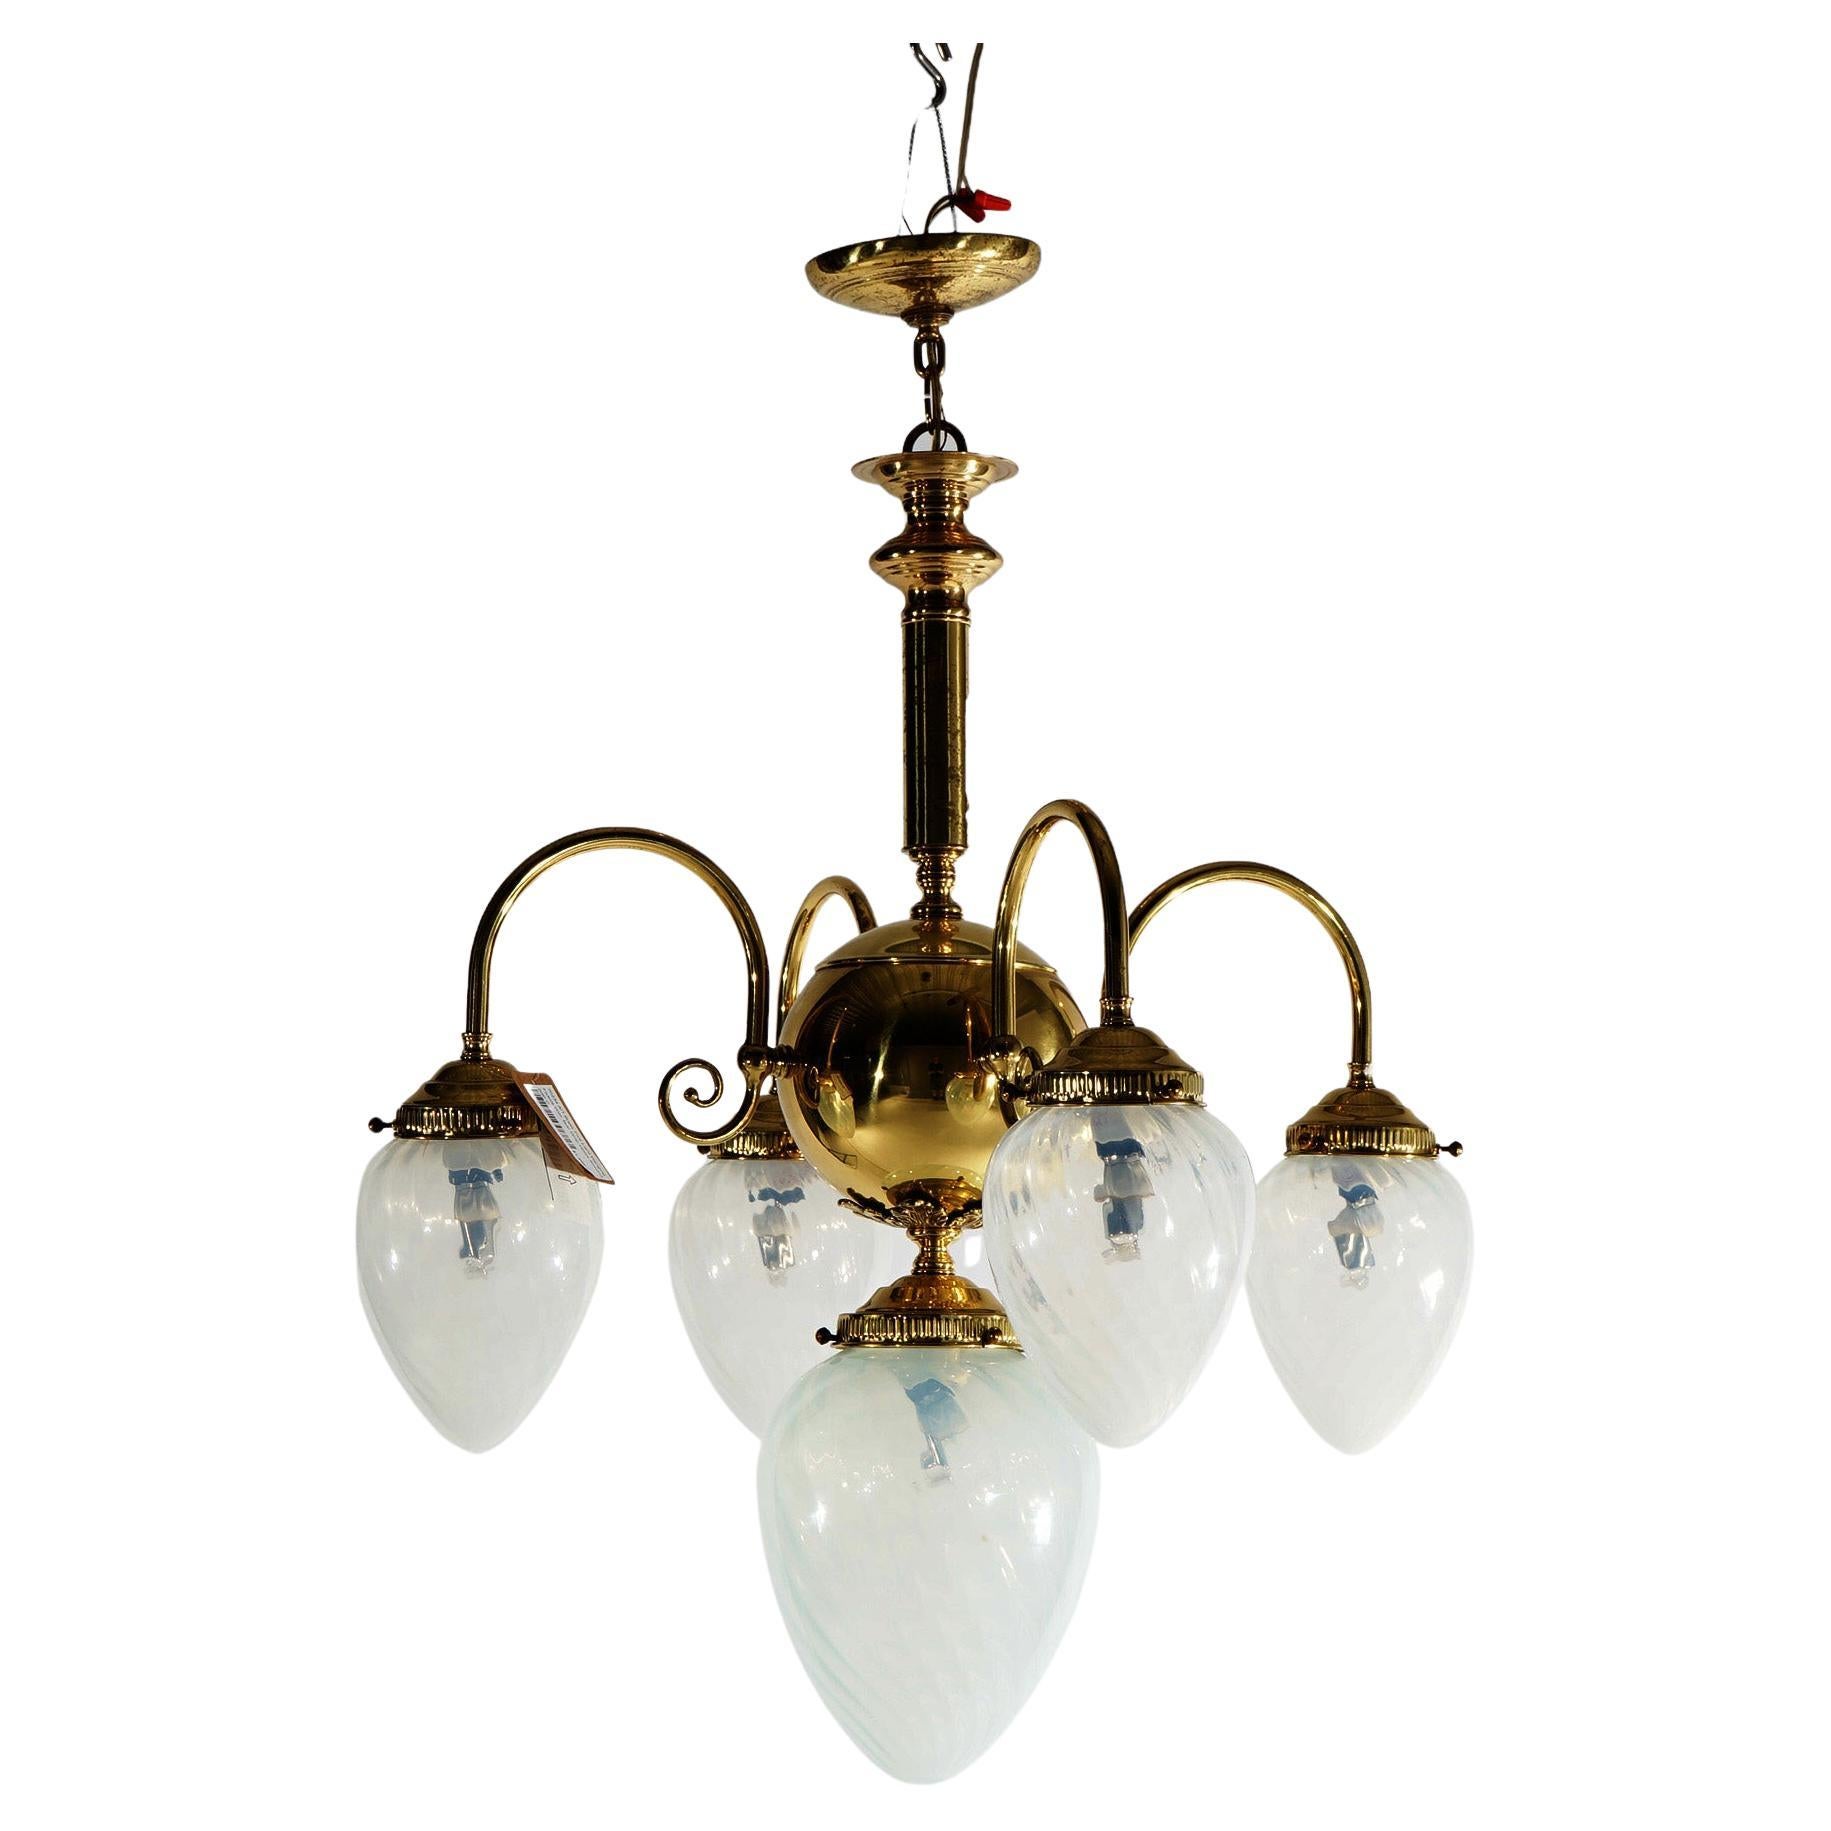 Brass Five-Light Hanging Fixture with Tear Drop Swirl Glass Shades 20th C